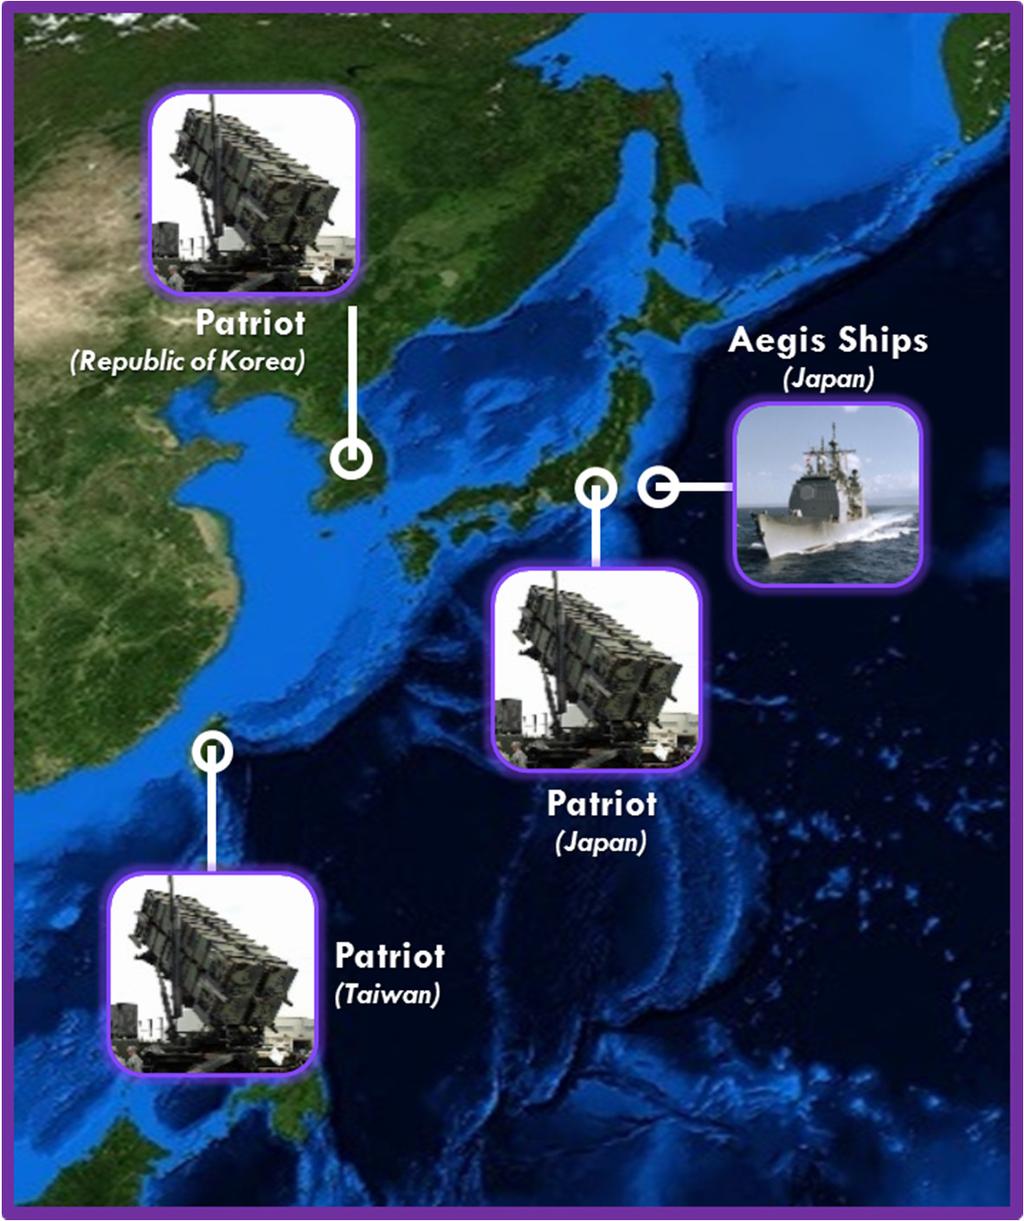 complement U.S. PAC-3 units already on the peninsula. This adds an important new layer to defend against missile attack.